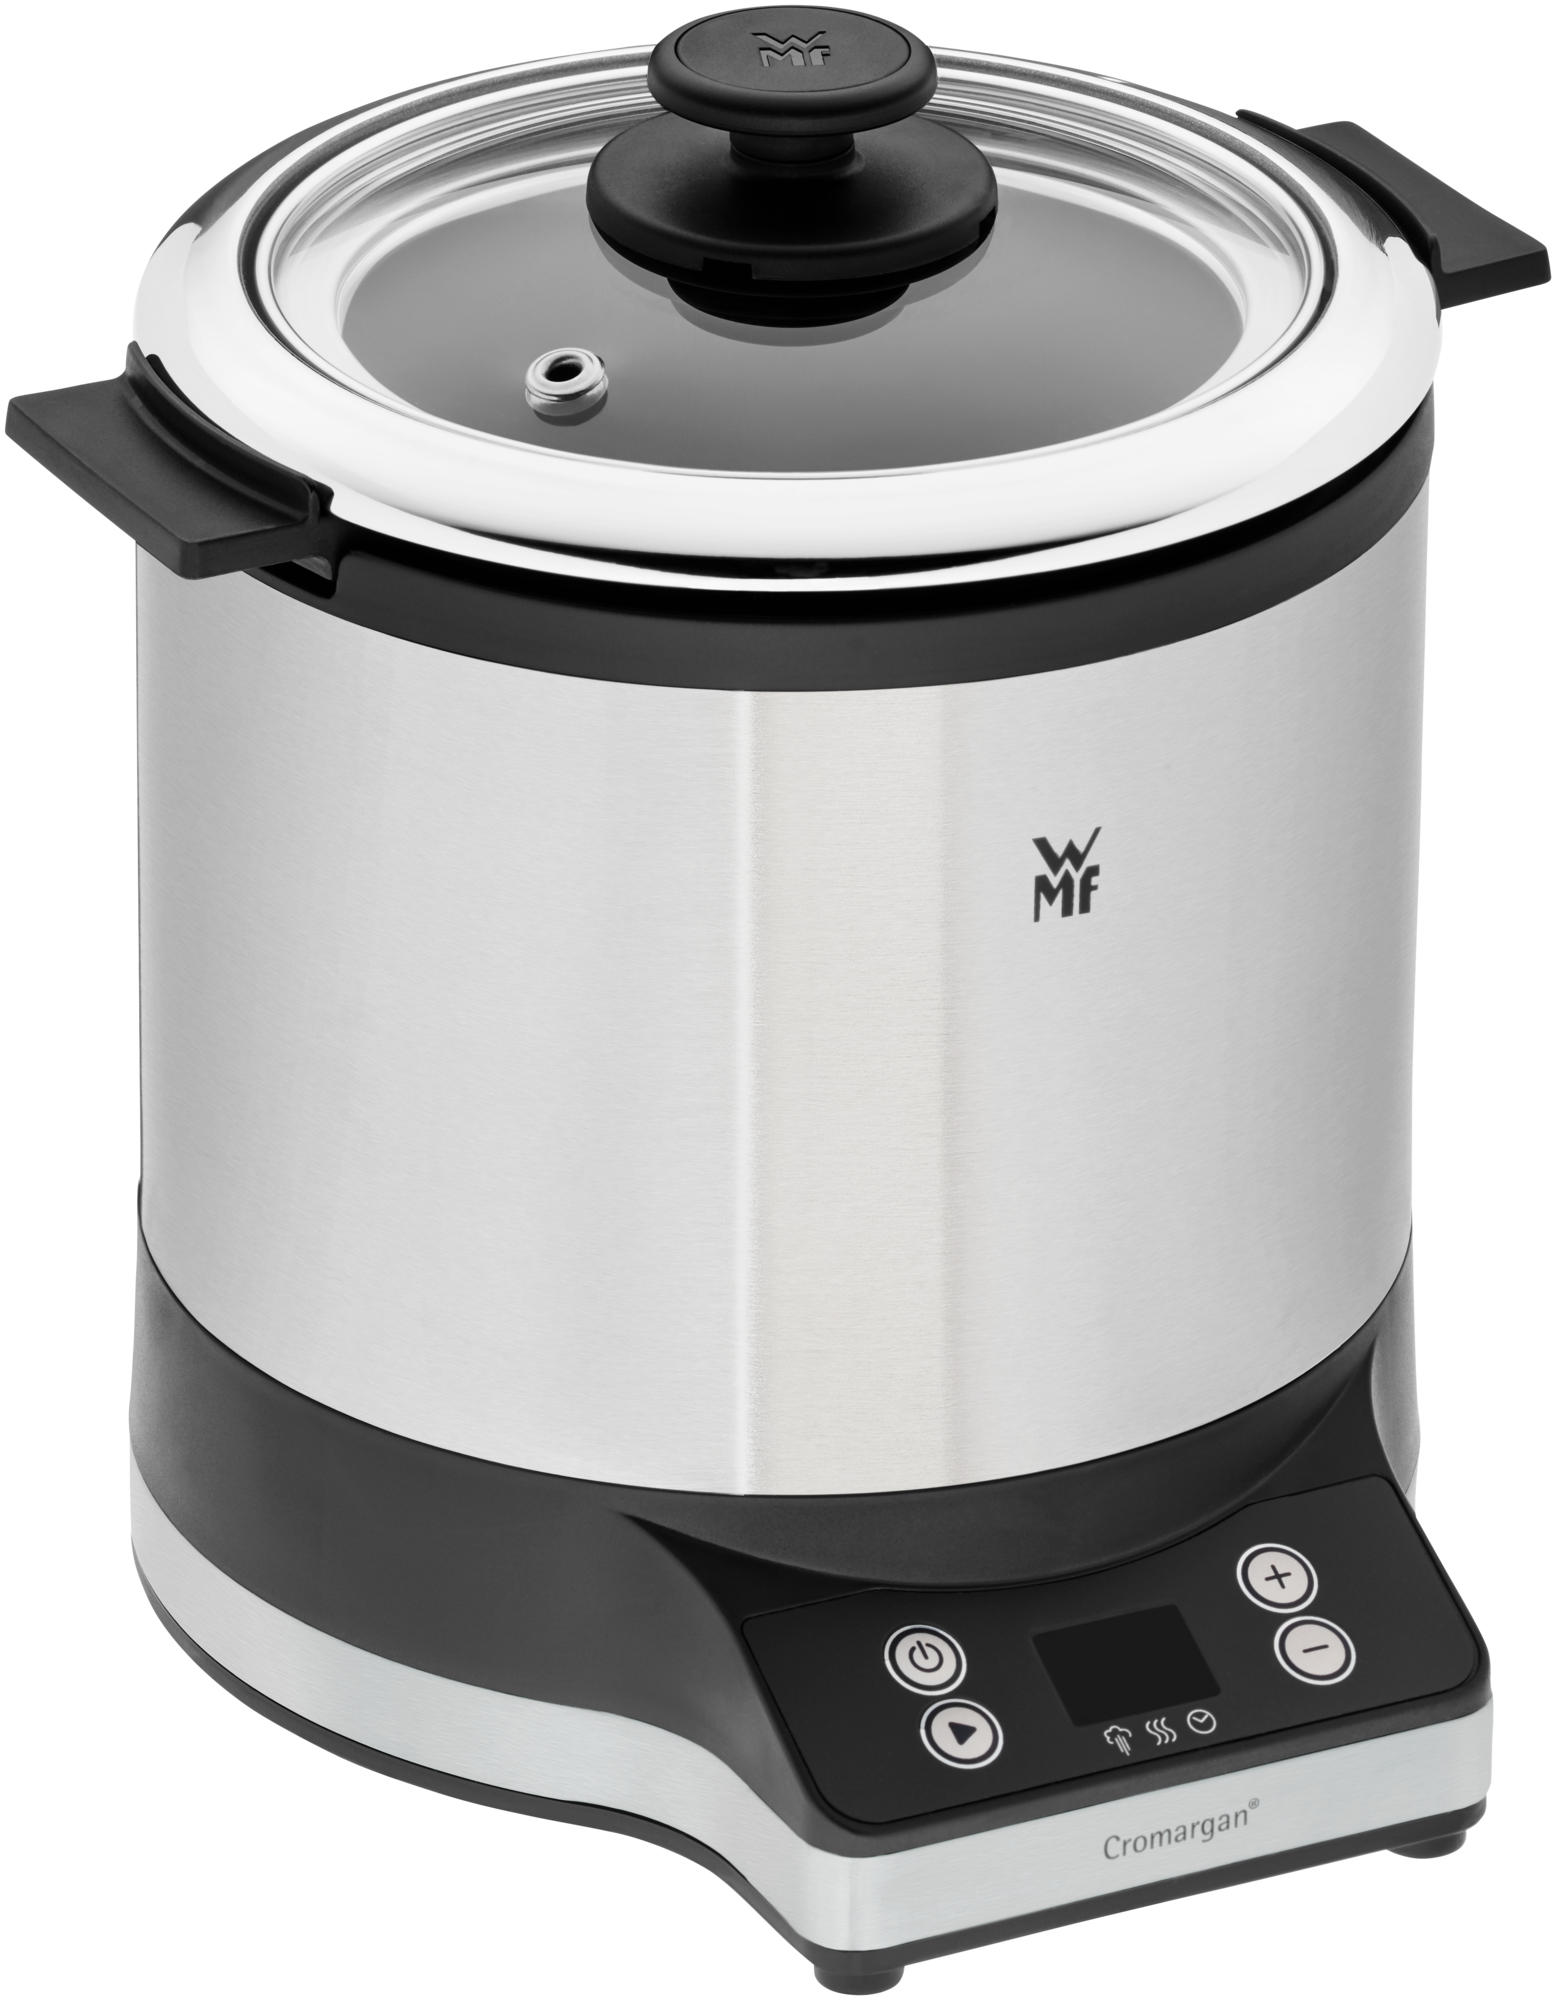 KITCHENminis Rice Cooker with to-go Lunch Box